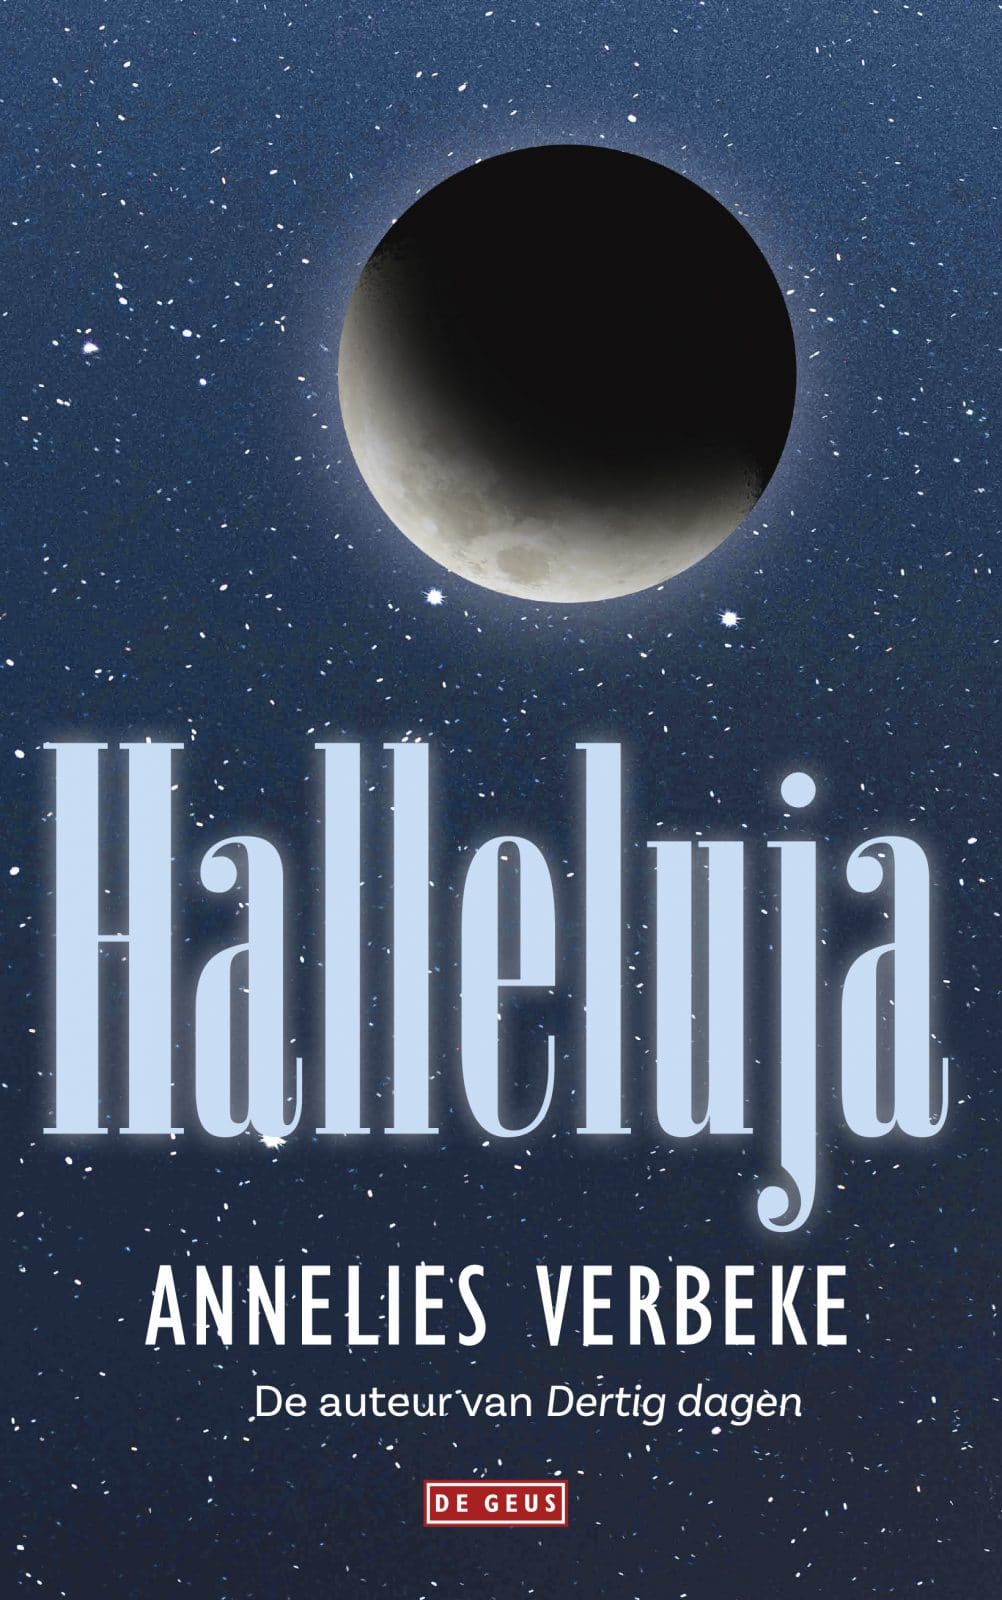 Podcast: Annelies Verbeke on her collection of short stories Halleluja